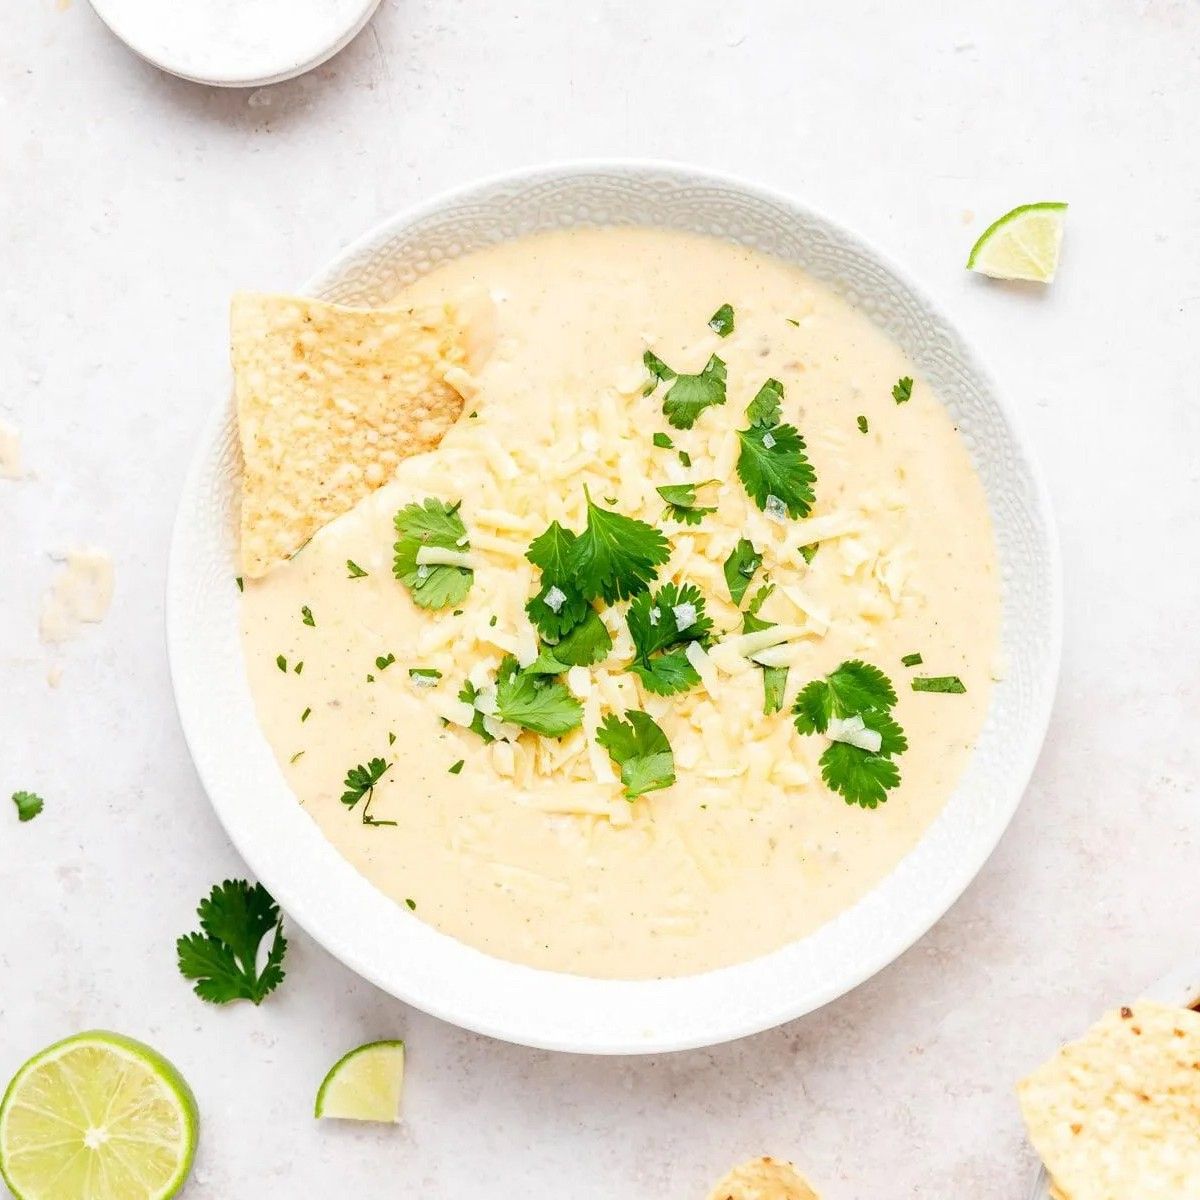 easy crock pot and slow cooker recipes for dinner like this queso blanco